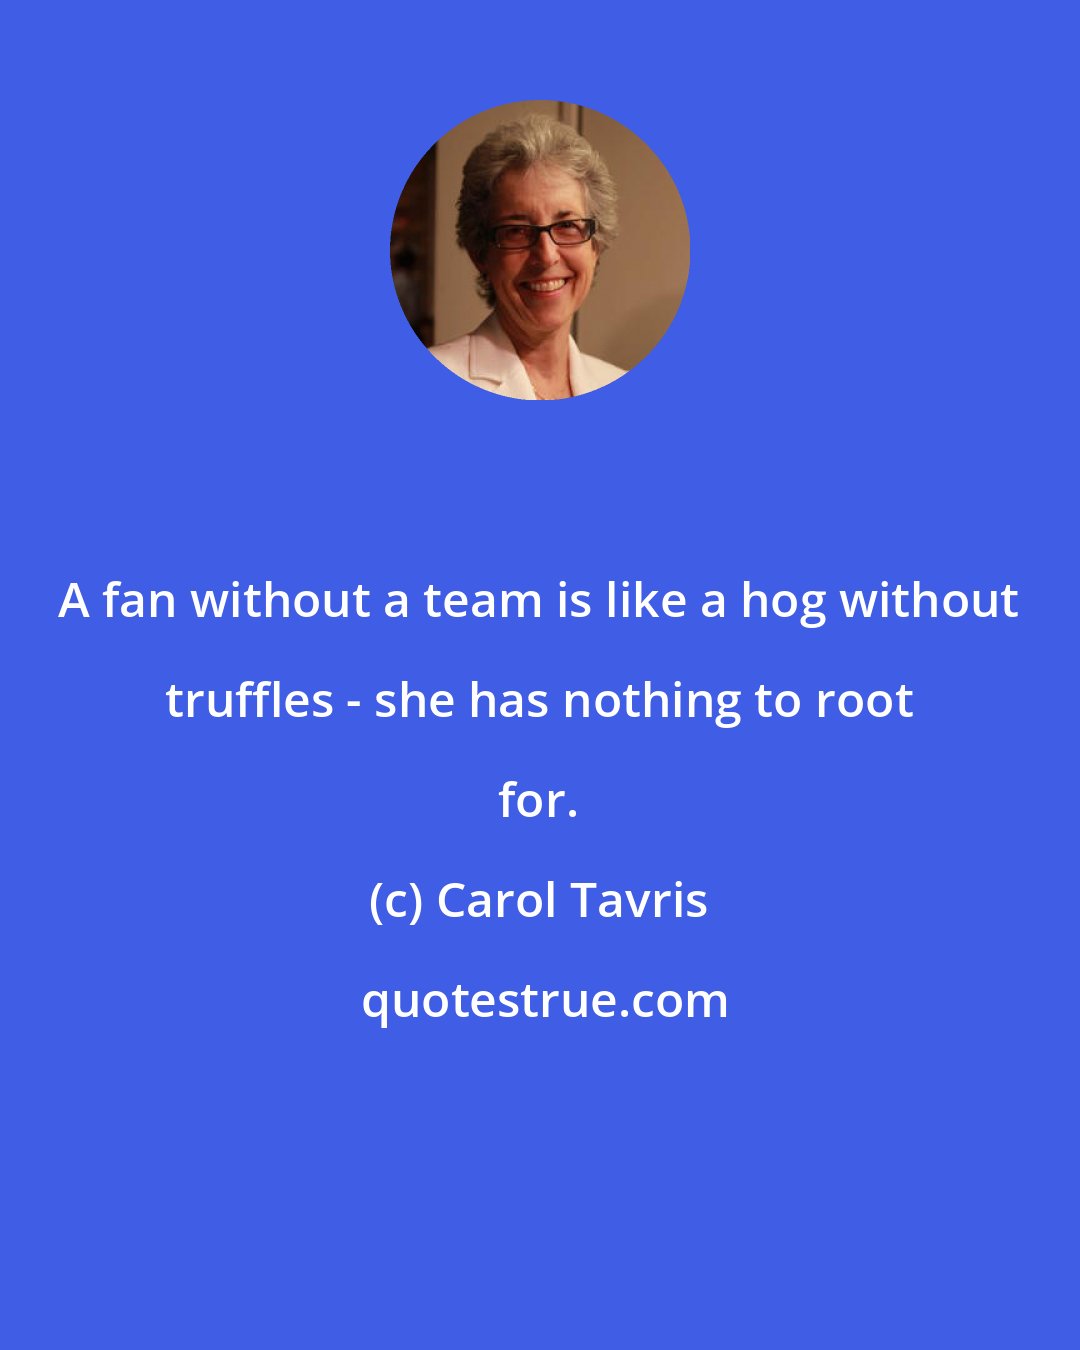 Carol Tavris: A fan without a team is like a hog without truffles - she has nothing to root for.